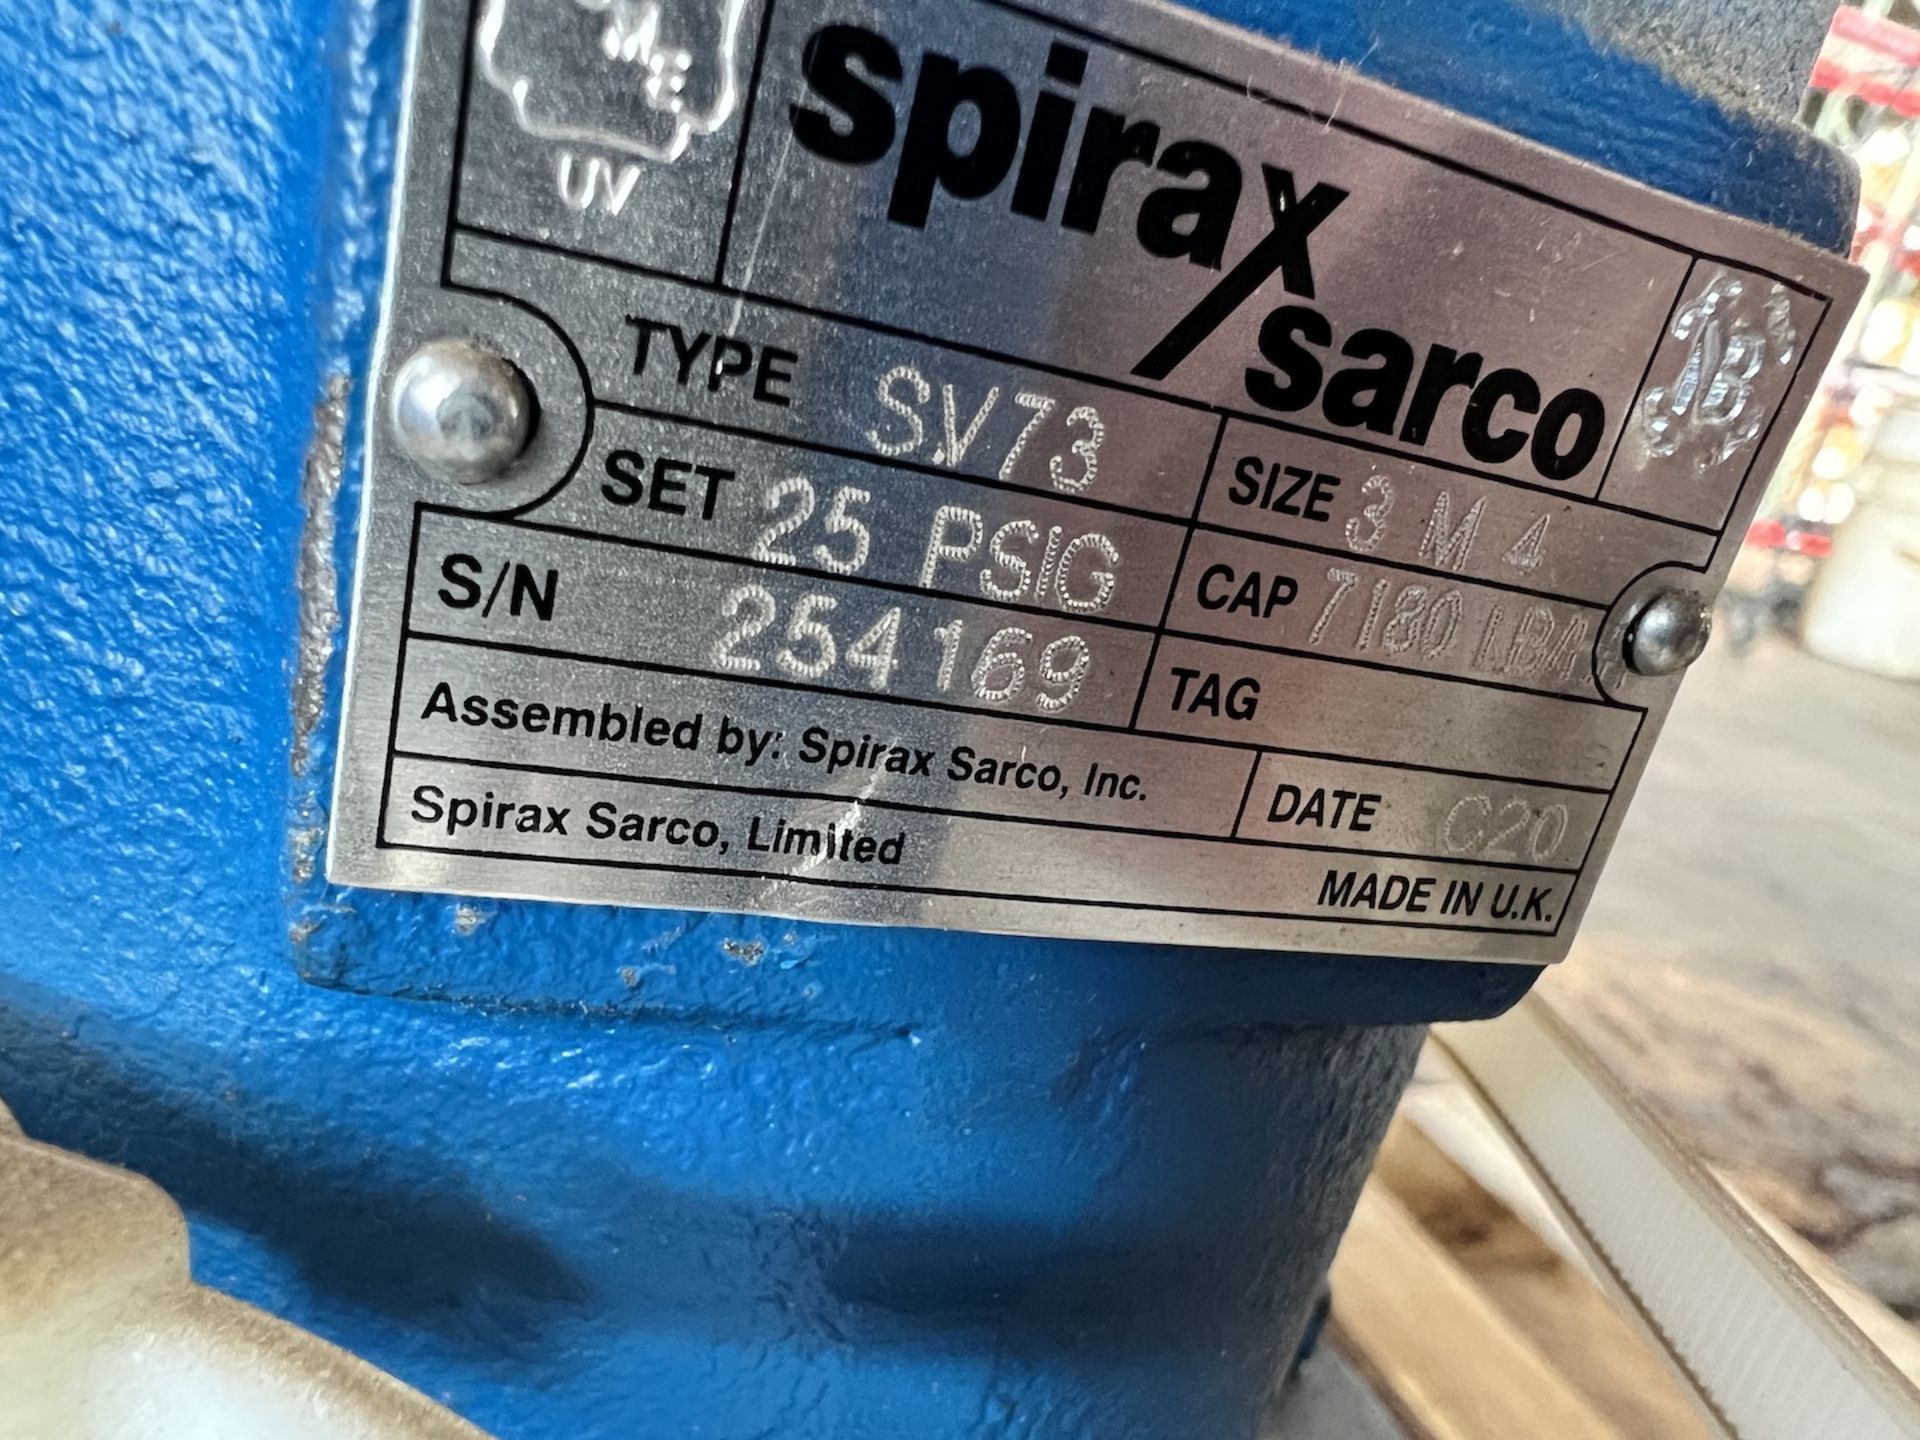 NEW SPIRAX SARCO SAFETY RELIEF VALVE, MODEL SV73, S/N 254169 - Image 7 of 9